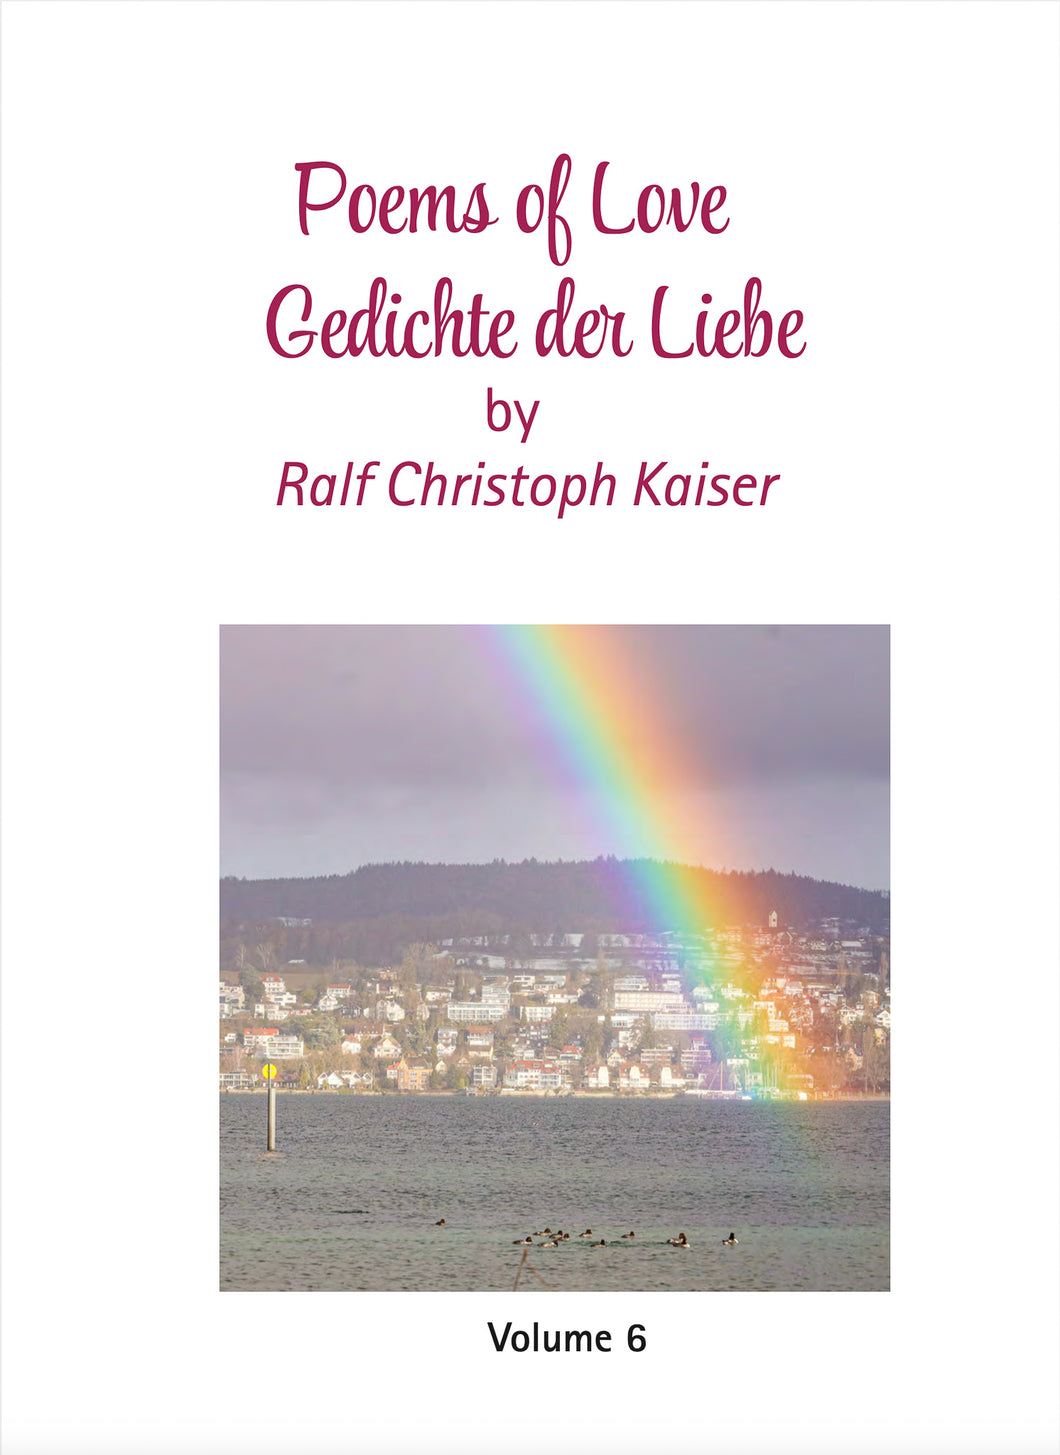 poems of love - gedichte der liebe by ralf christoph kaiser volume 6 now in print available and in this store as pdf